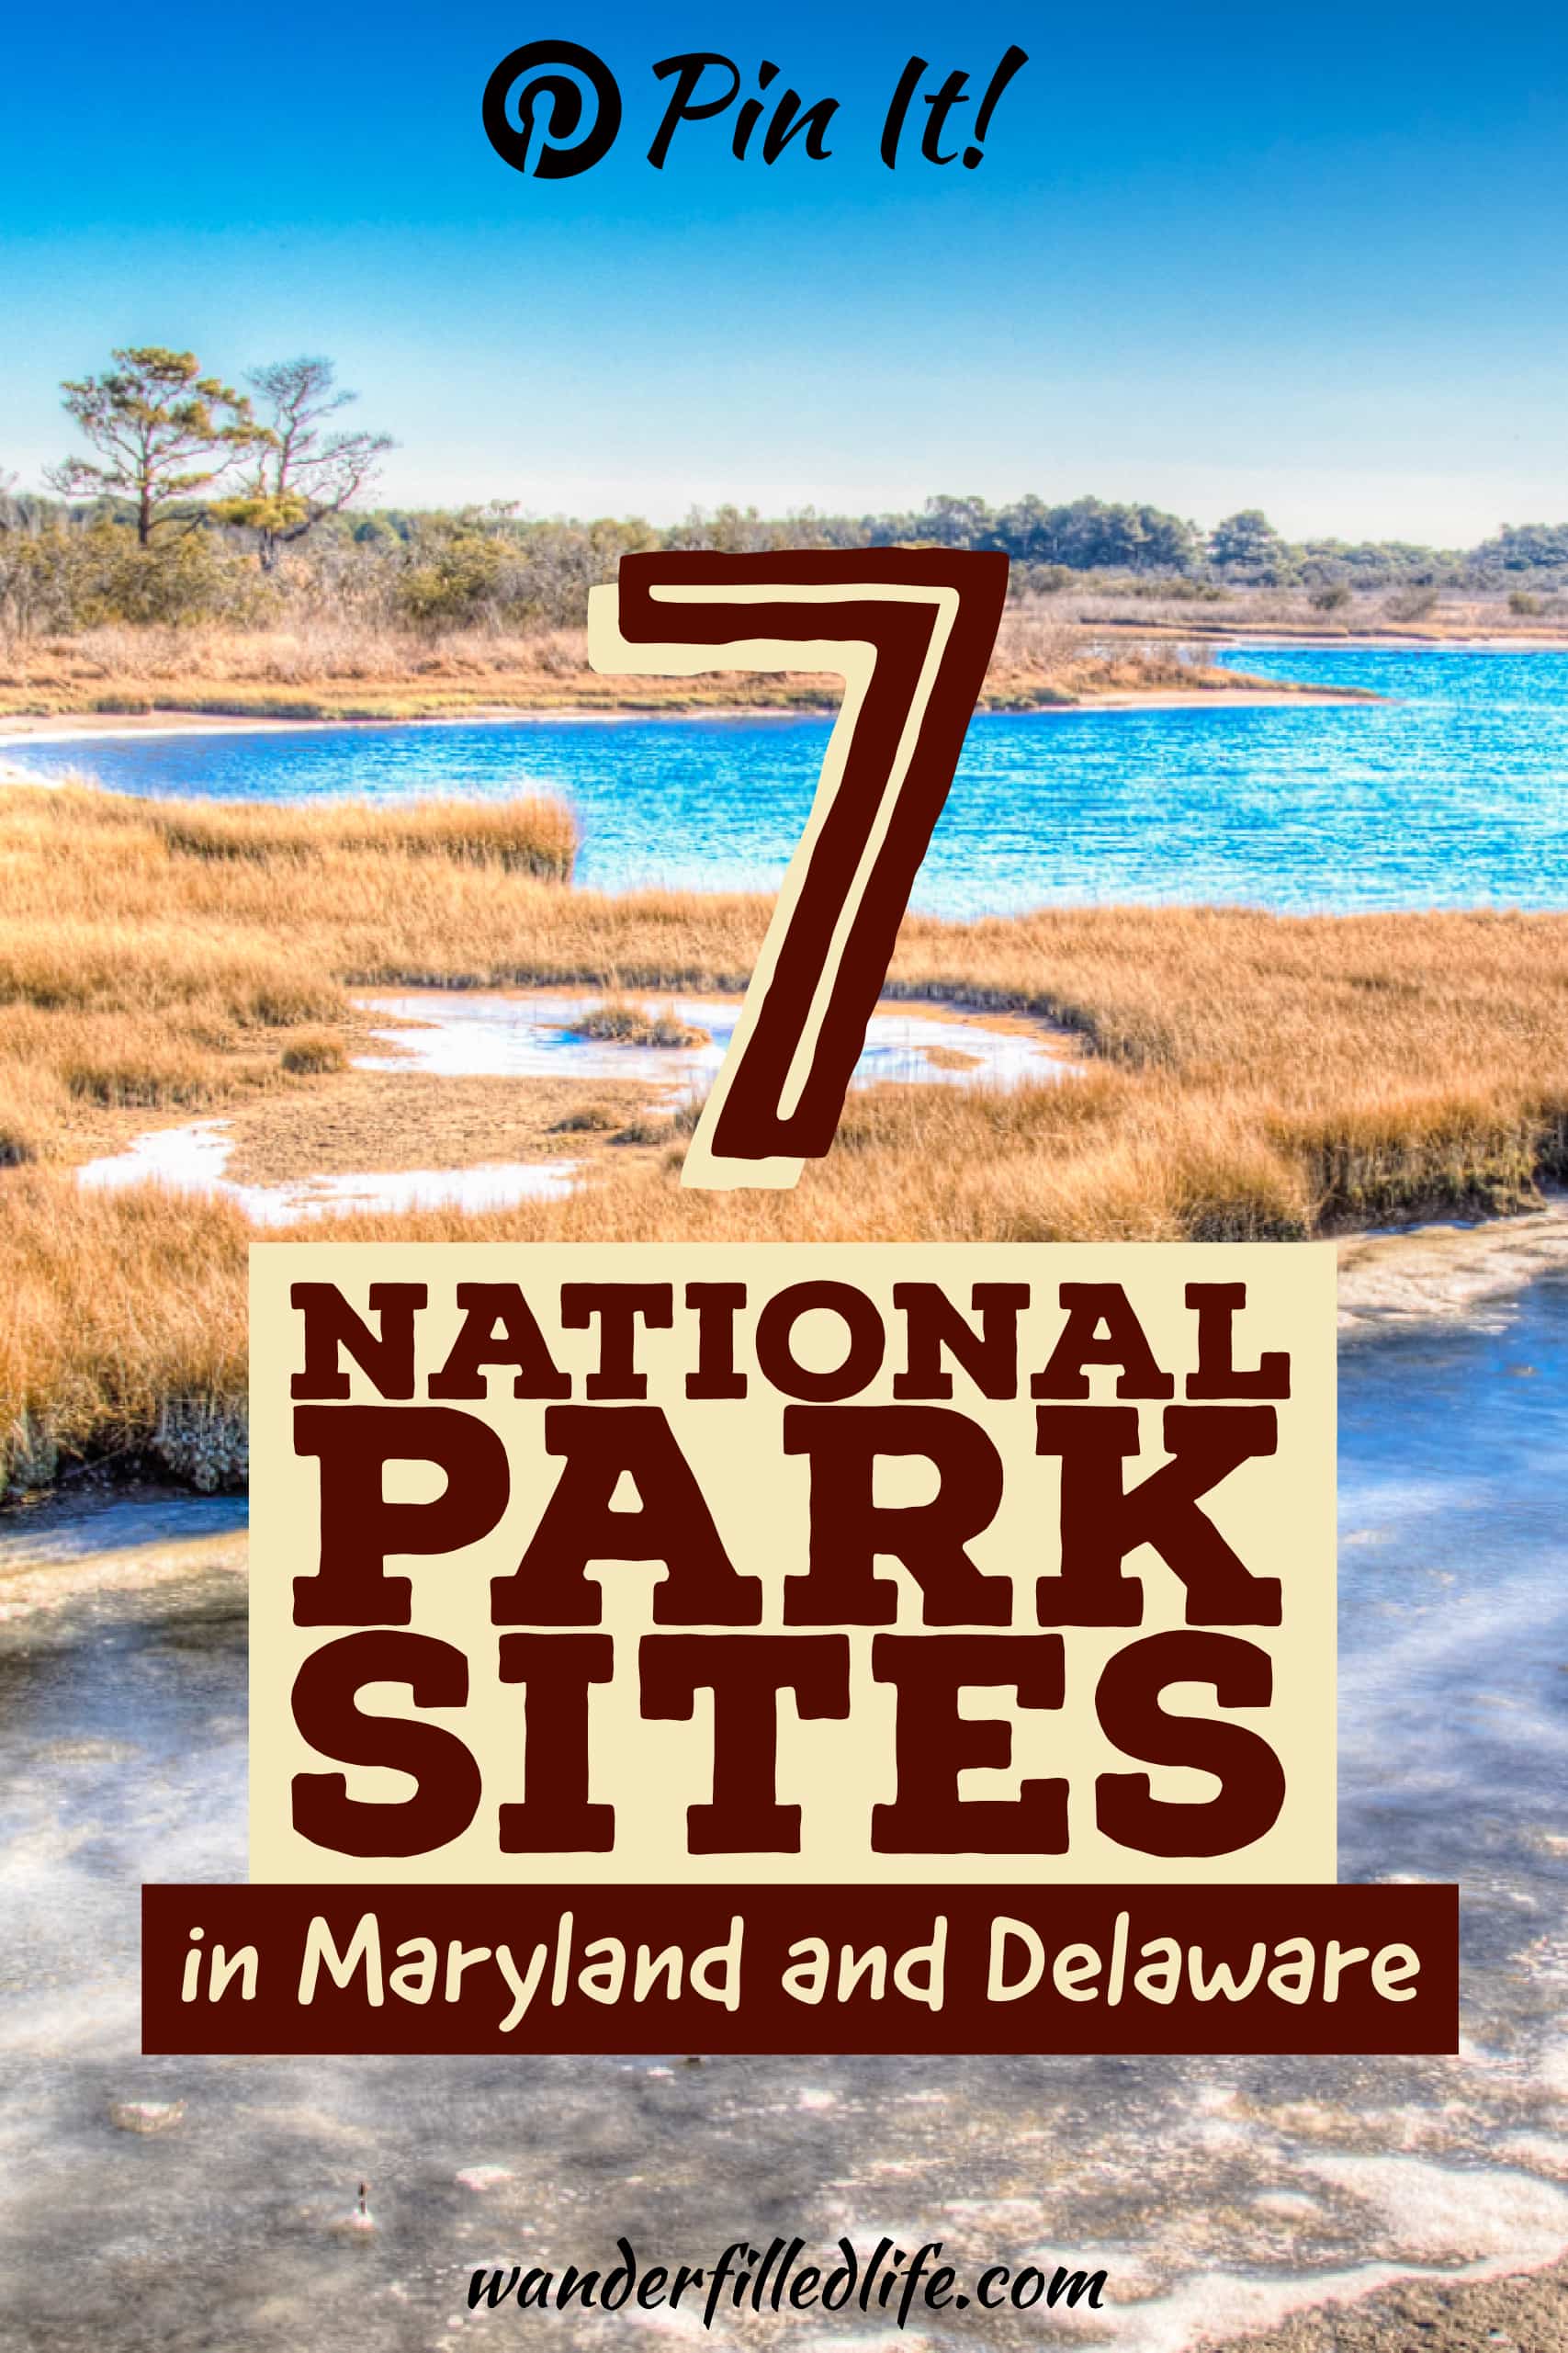 Our winter visit to the one and only national park site in Delaware, First State NHP, and six sites in Maryland: Assateague Island NS, Harriet Tubman Underground Railroad NHP, Hampton NHS, Fort McHenry, Fort Washington and Piscataway Park.